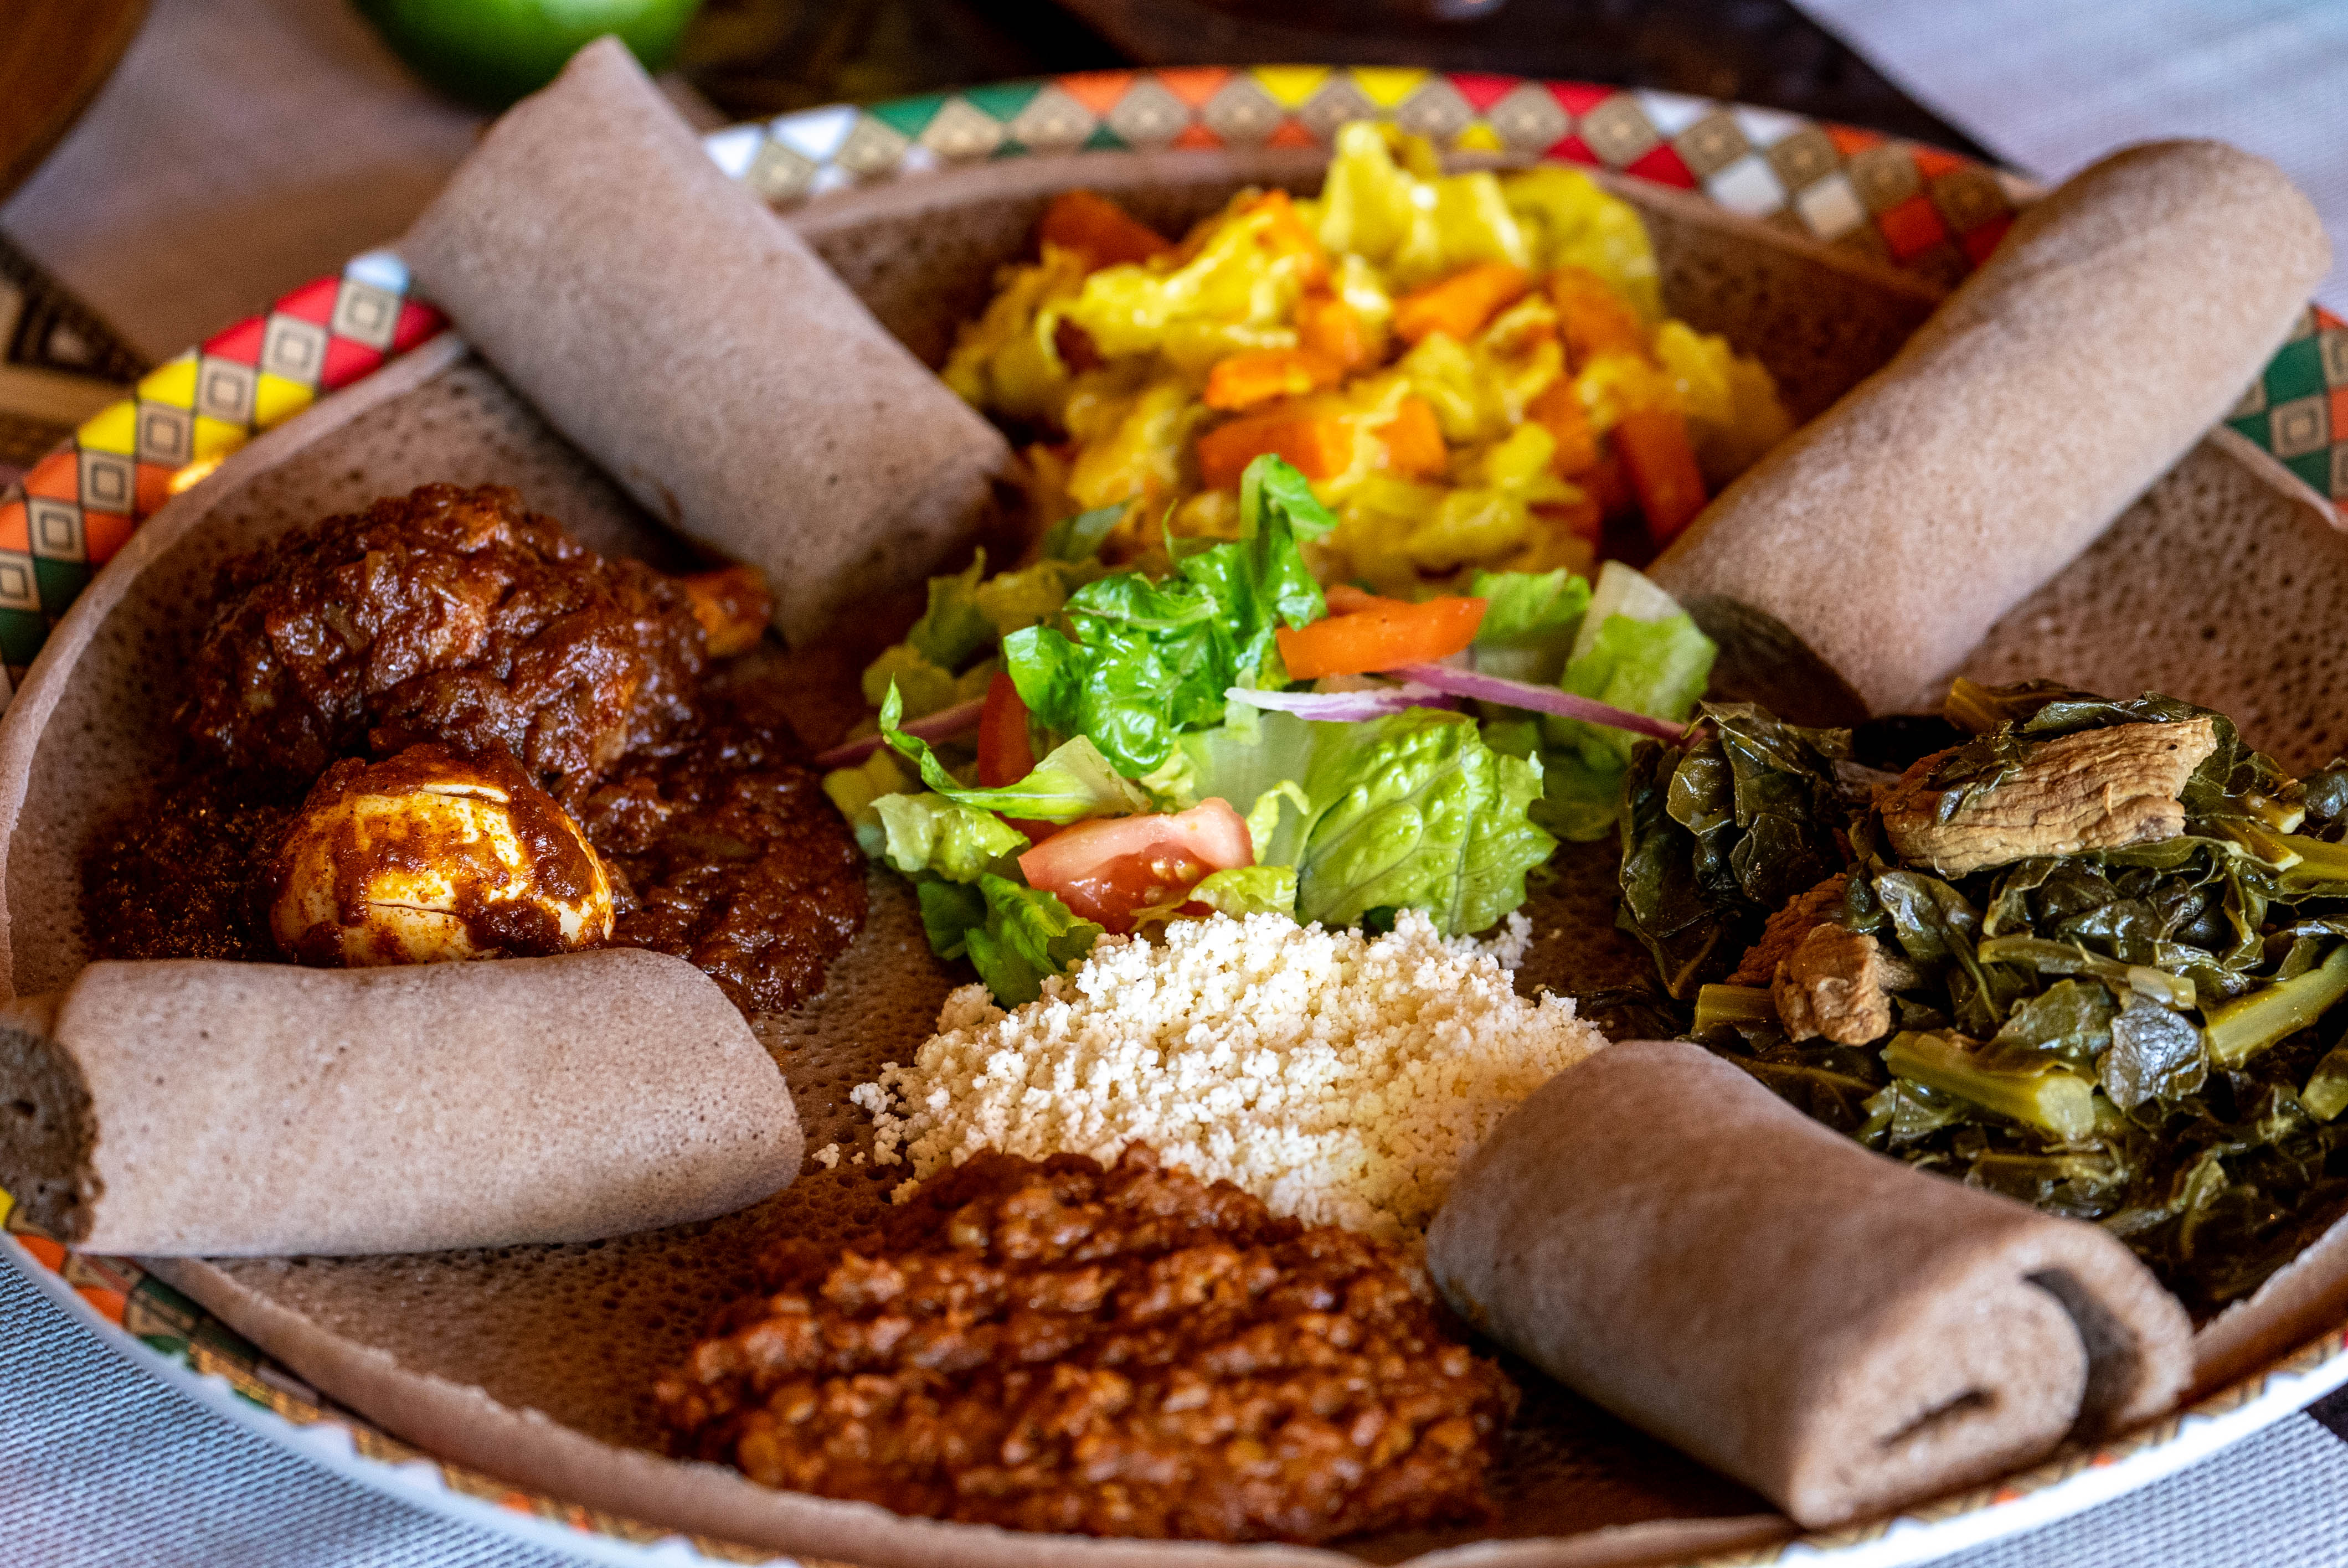 A meat and veggie sampler consisting of spicy chicken, collard greens with beef, red spicy lentils and cabbage is prepared at Authentic EthioAfrican in Phoenix on Sept. 17, 2022.